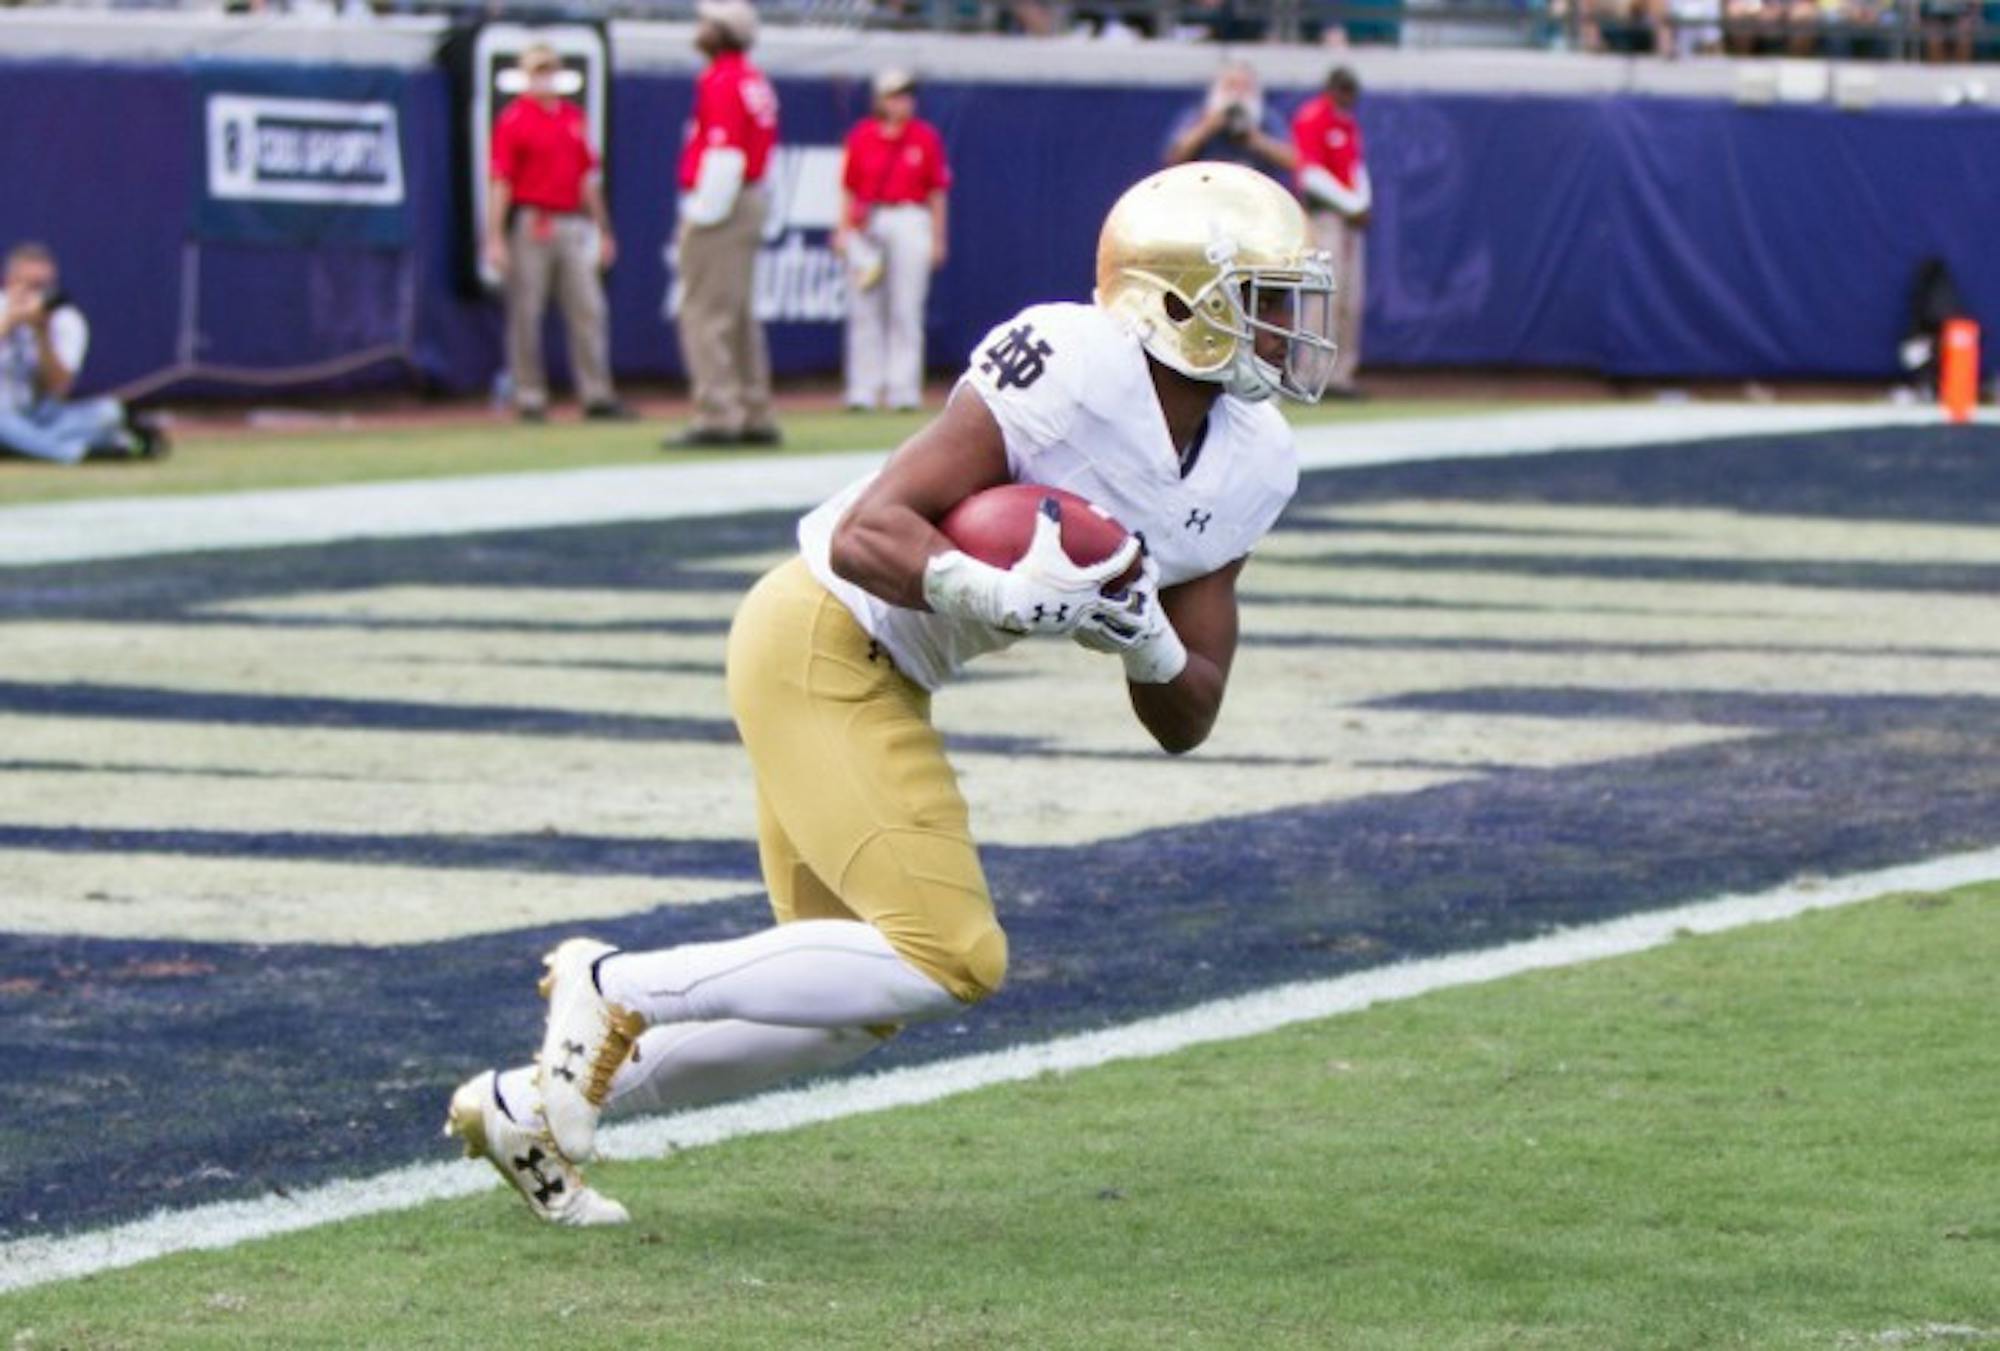 Irish sophomore receiver C.J. Sanders returns a kickoff during Notre Dame’s 28-27 loss to Navy on Nov. 5 at EverBank Field. Sanders returned the opening kickoff against Army on Nov. 12 for a touchdown.